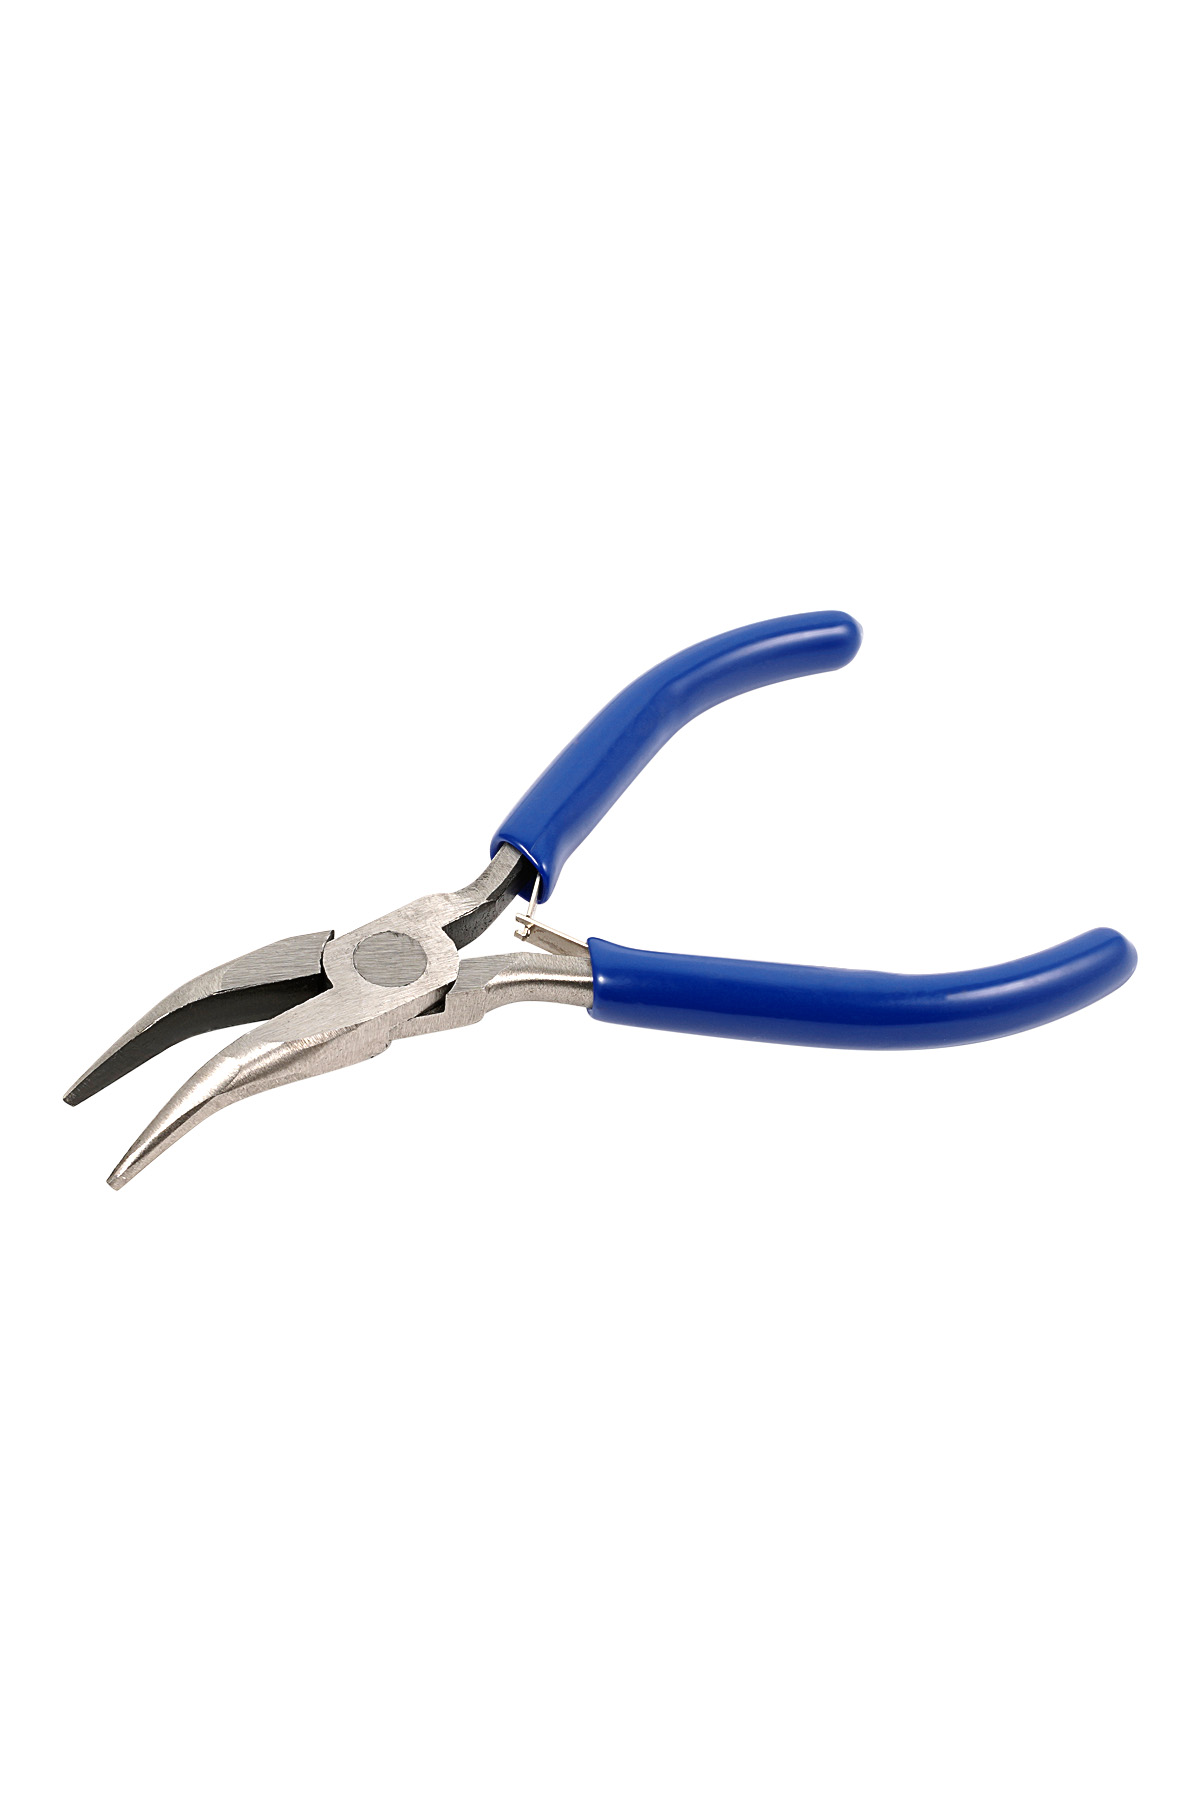 Flat nose pliers for bending jewelry